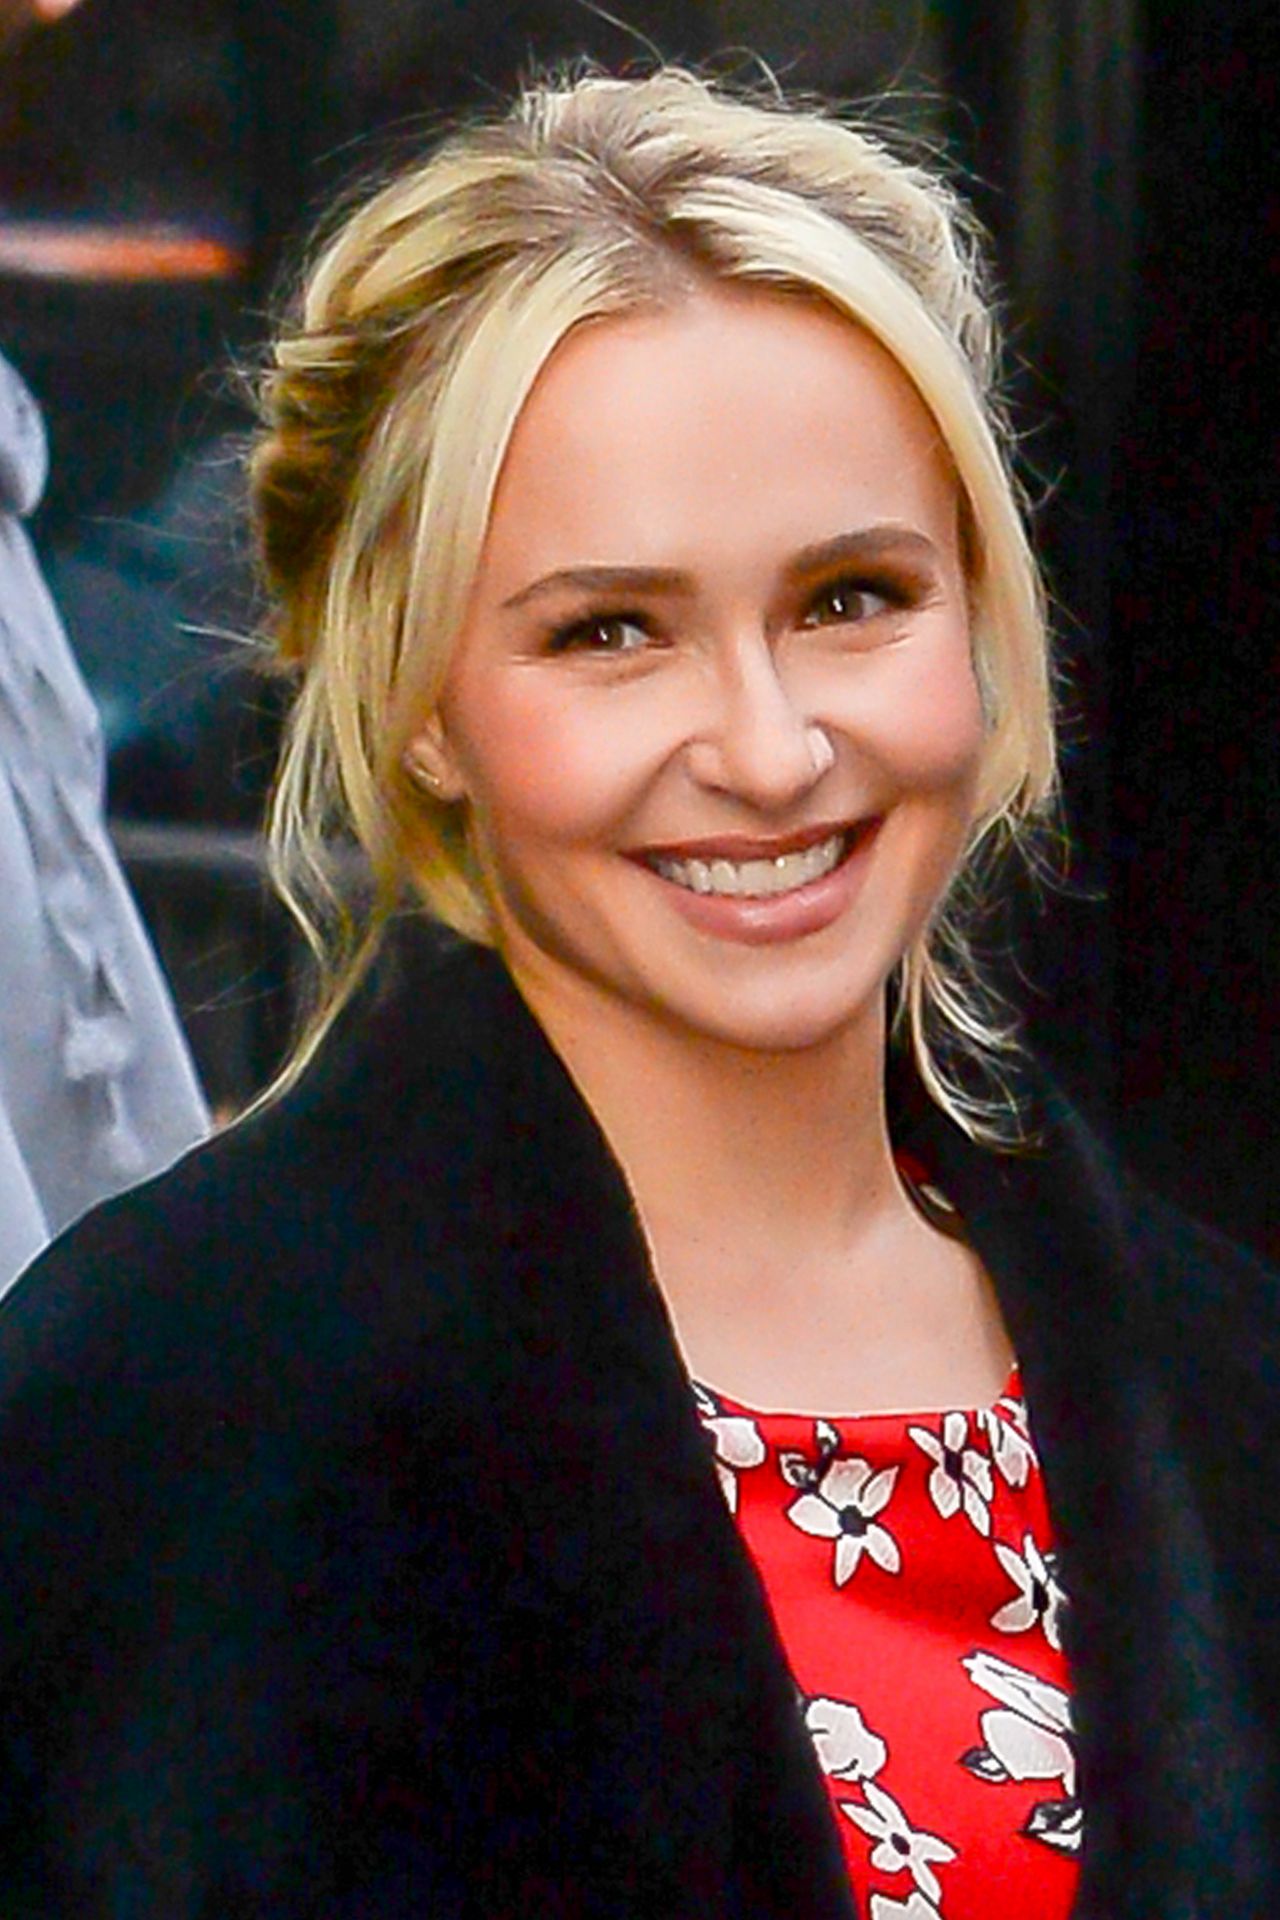 Hayden Panettiere - Waves to Fans While Coming Out of Good Morning